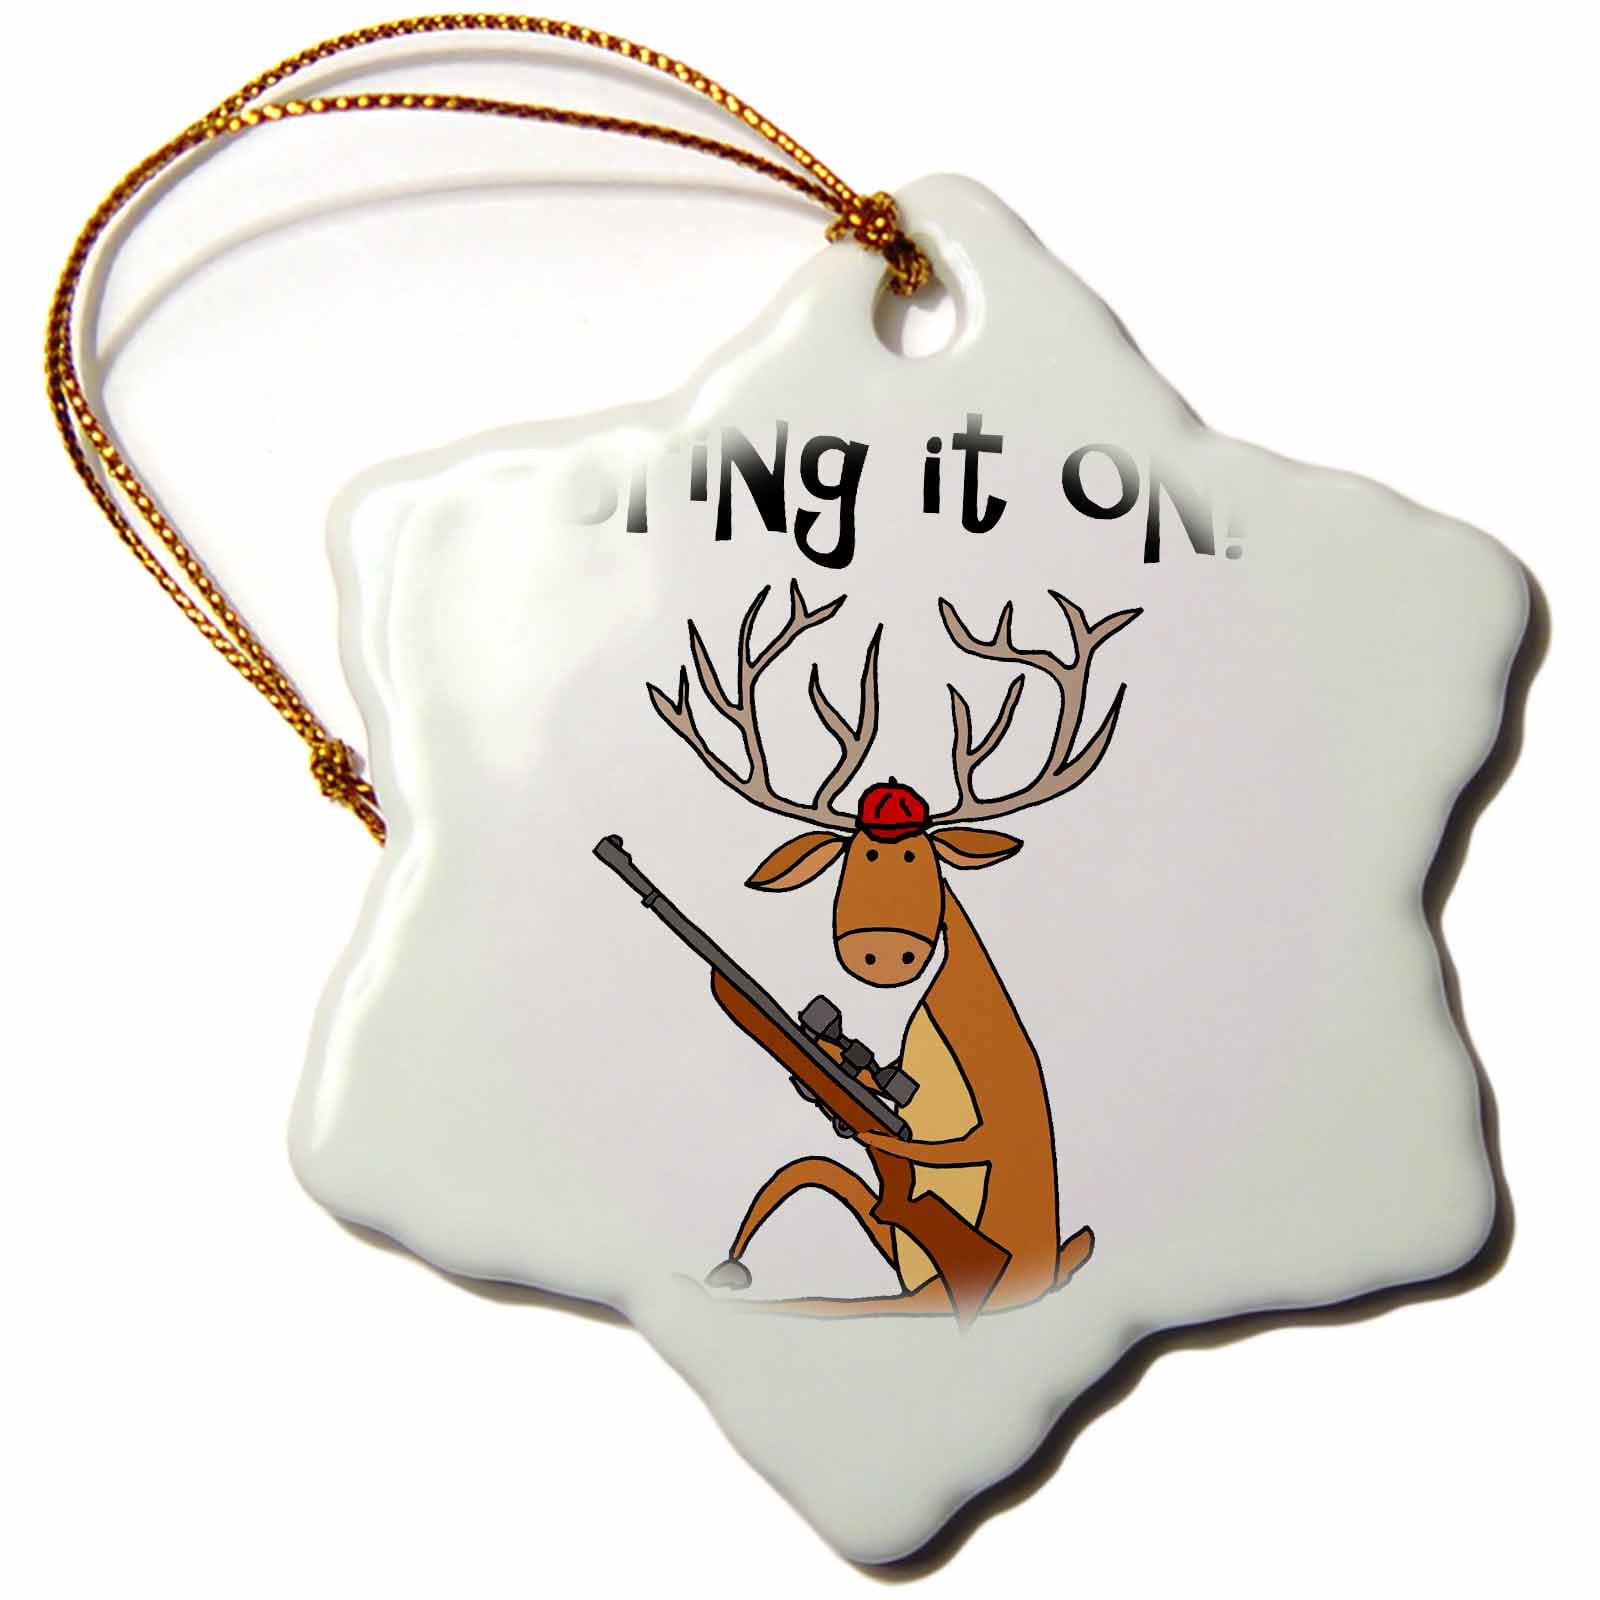 3dRose Cute Buck Deer with Hunting Rifle Funny Cartoon Multi-color  Porcelain Holiday Decorative Accent Snowflake Ornament, 3